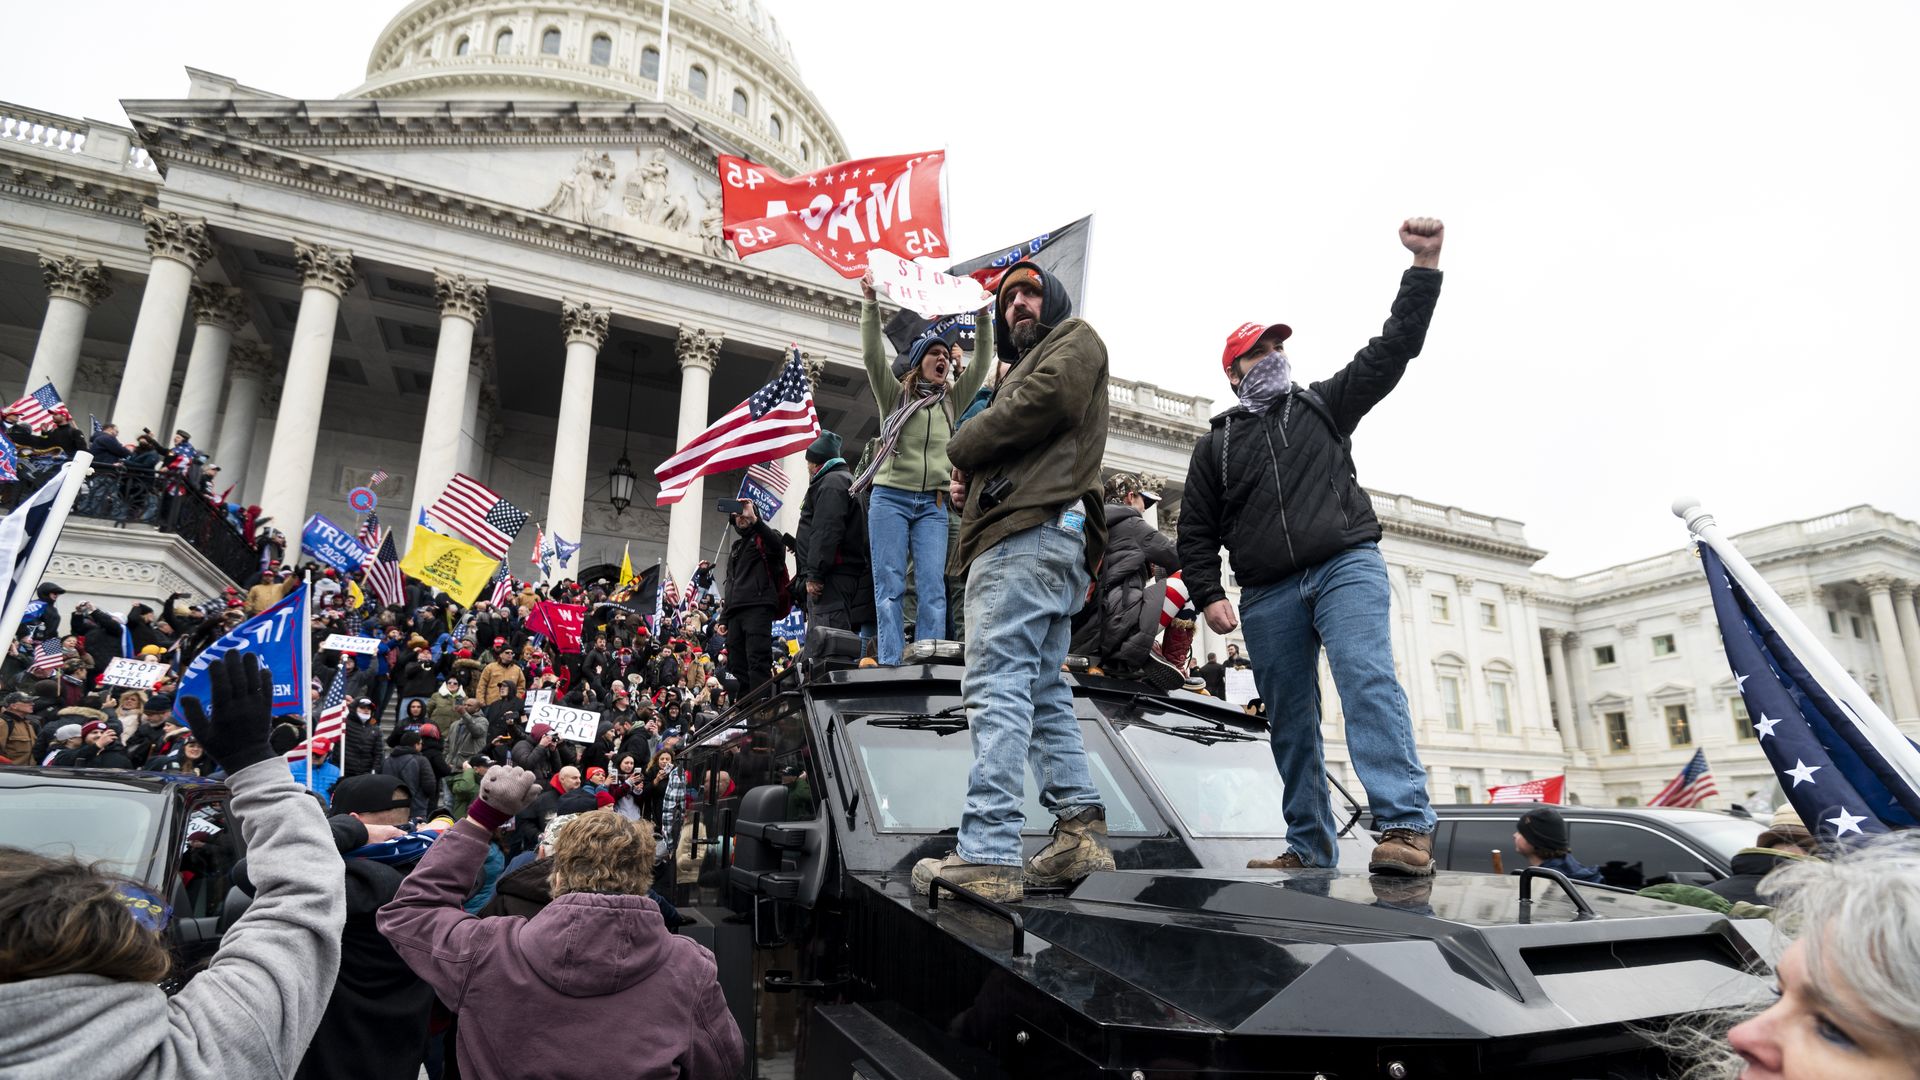 Photo of Trump supporters crowding the steps to the U.S. Capitol with banners, signs and fists